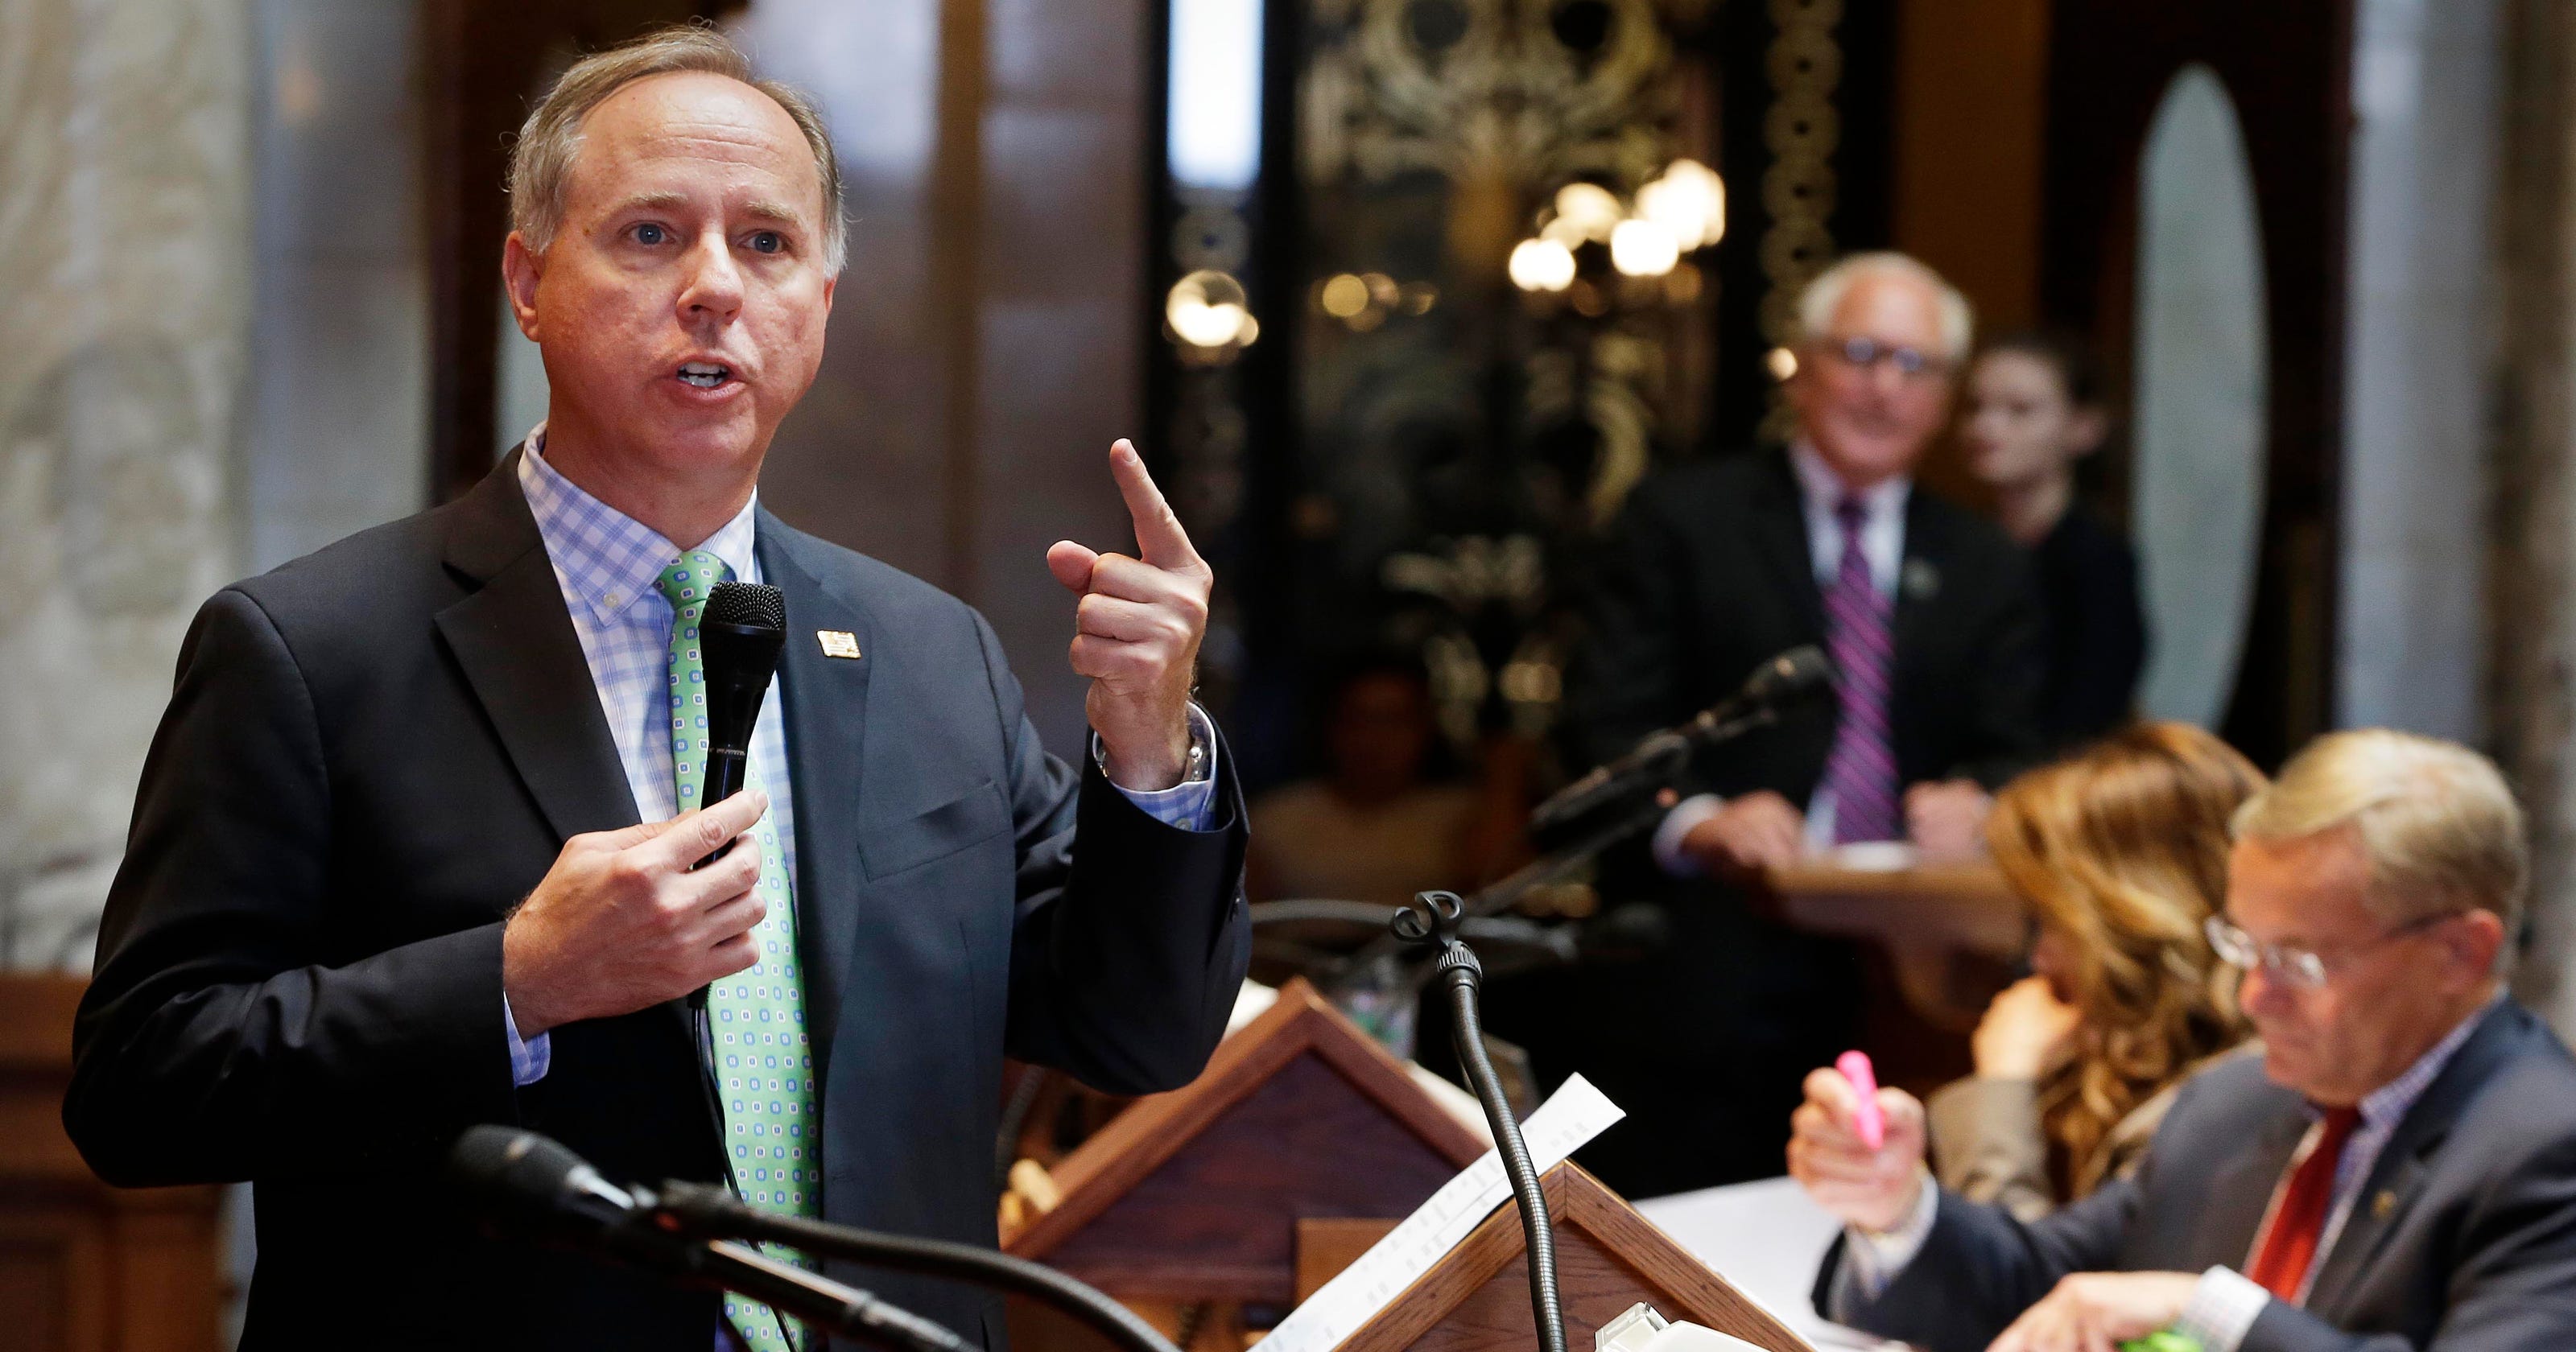 Wisconsin GOP leader Robin Vos says climate change is ‘probably’ real - Milwaukee Journal Sentinel